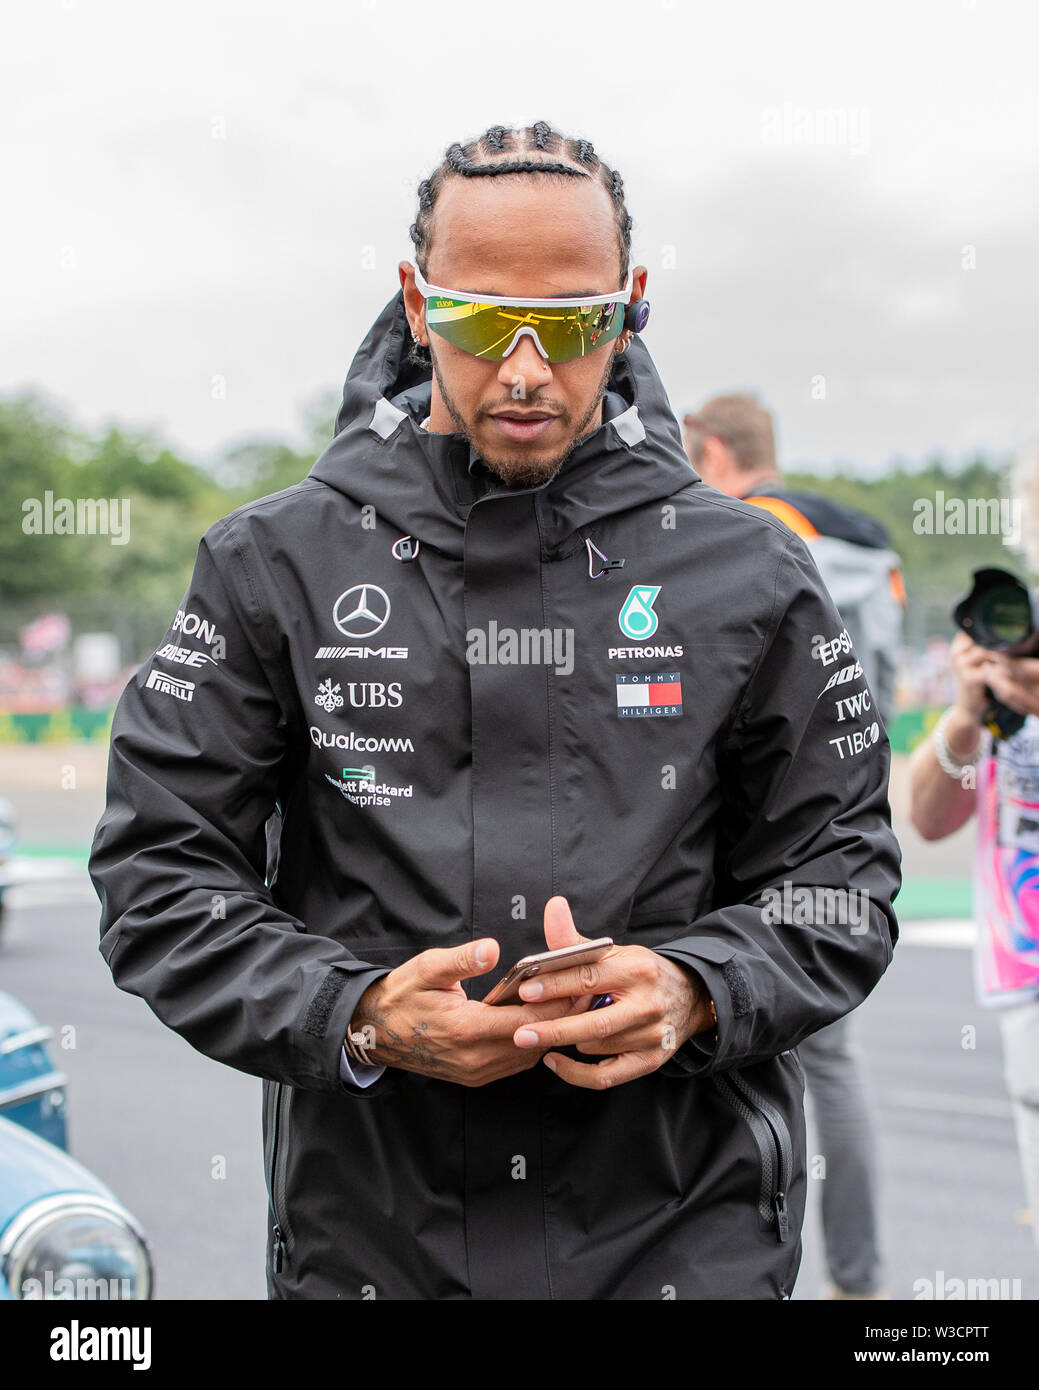 Towcester, United Kingdom. July, 2019. Lewis Hamilton of Mercedes in Drivers' Track Parade pior to todays Race Formula 1 Rolex British Grand Prix 2019 at Circuit on Sunday, July